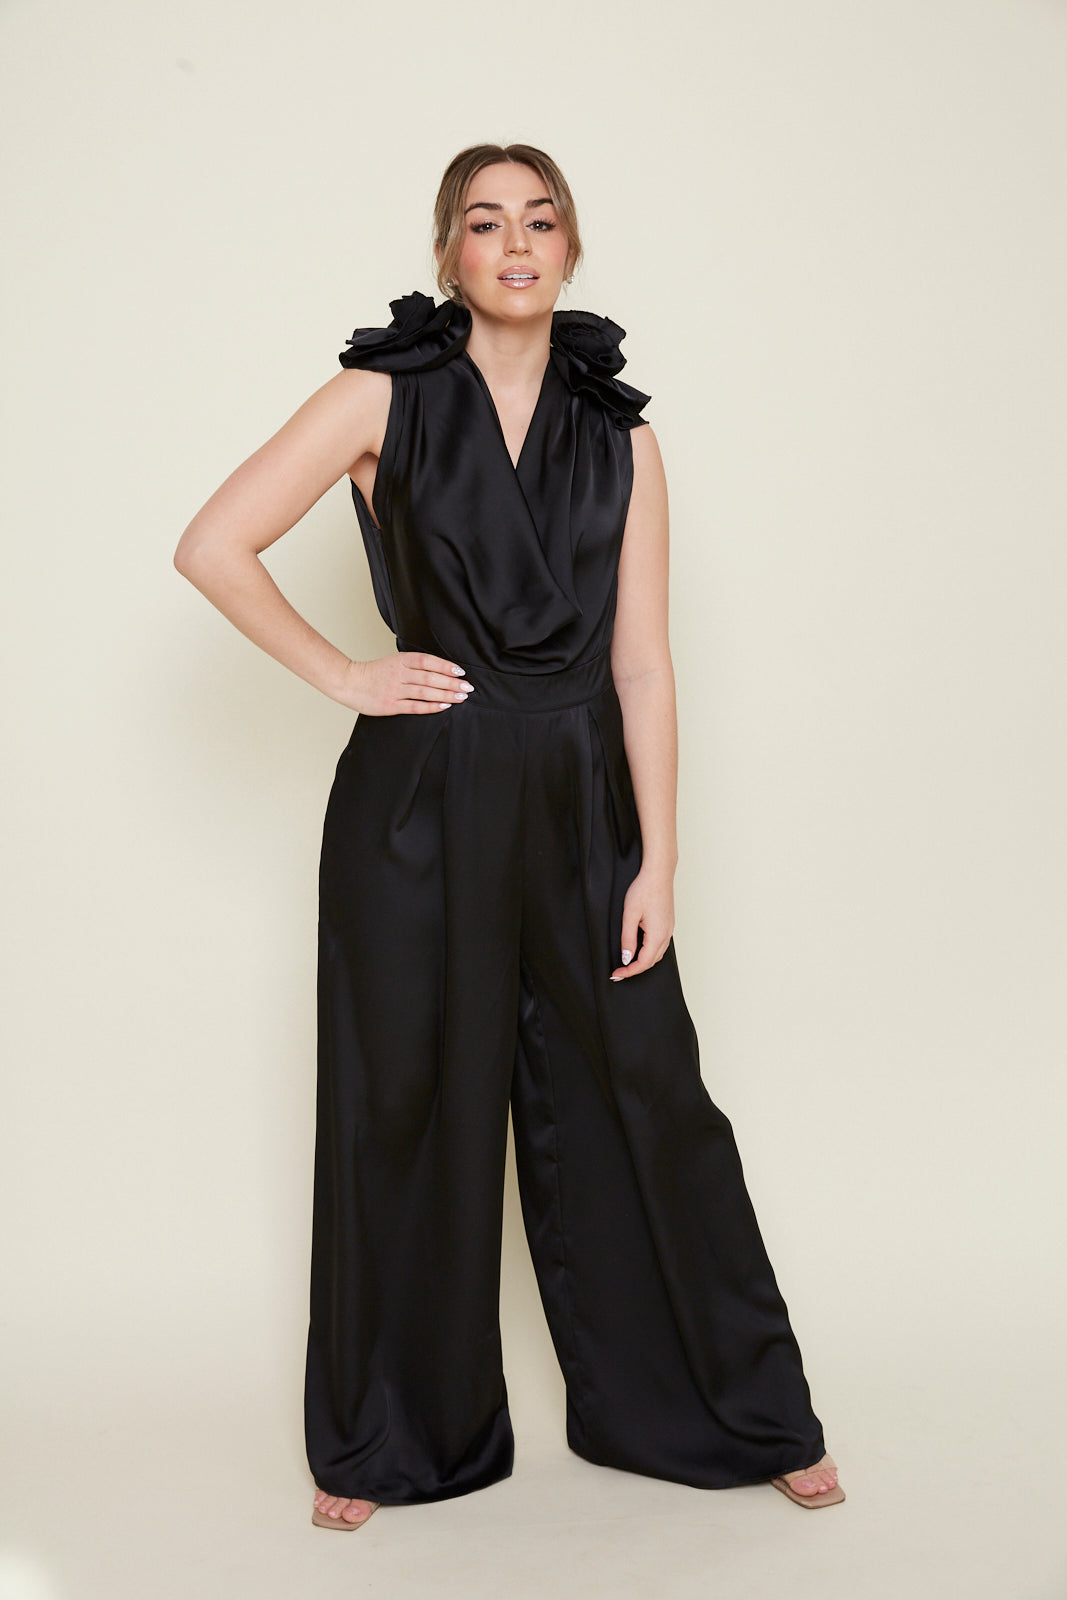 ASYOU satin cowl lattice jumpsuit with strap detail in black